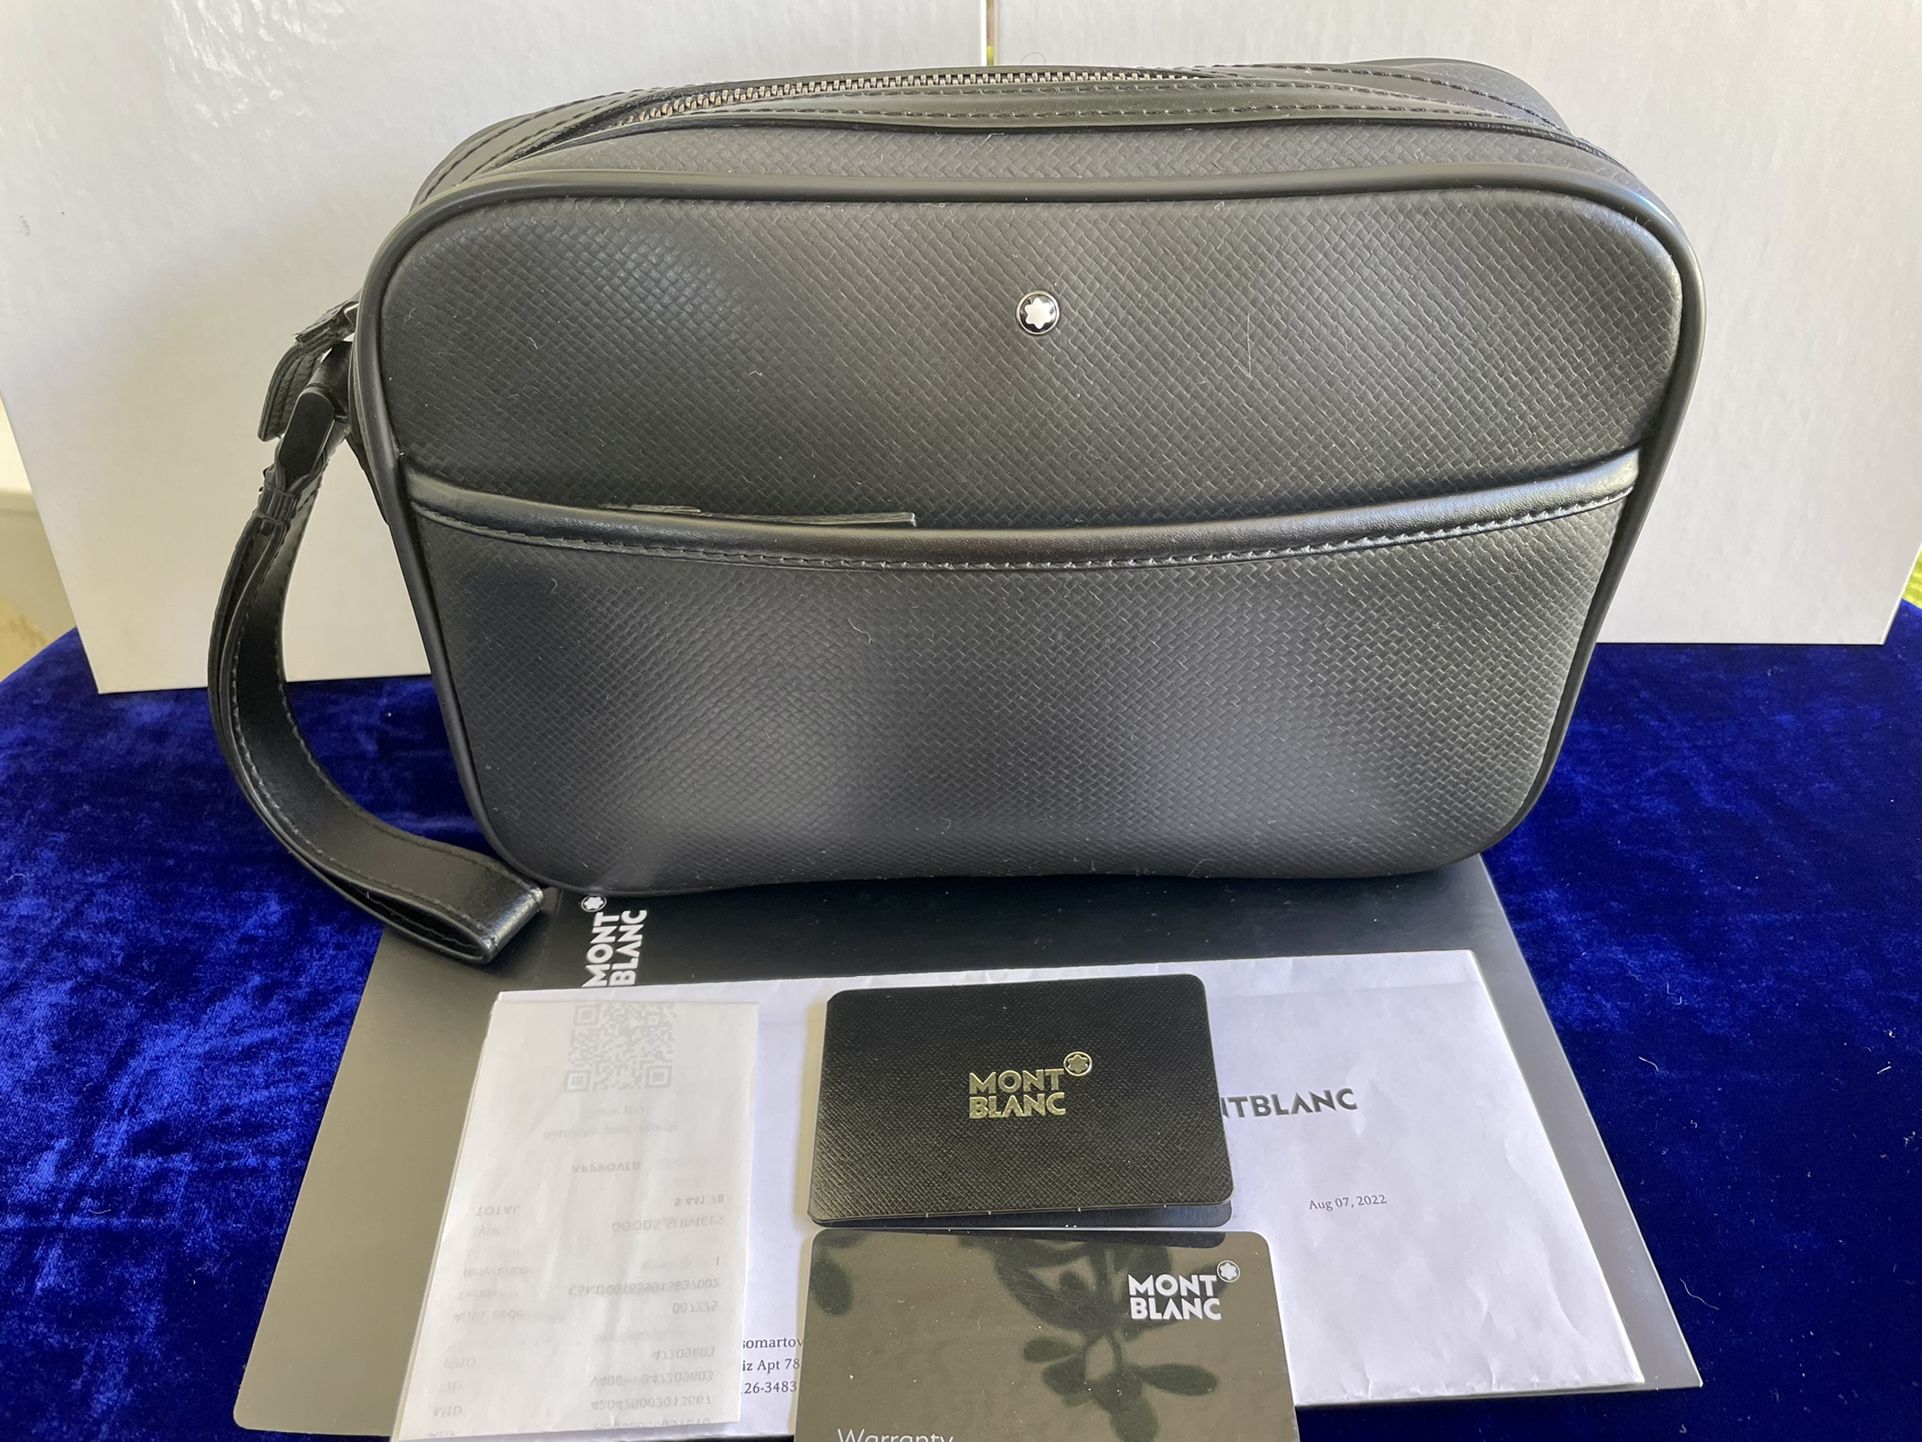 Montblanc Sartorial Zip Top Messenger Bag Like New Condition